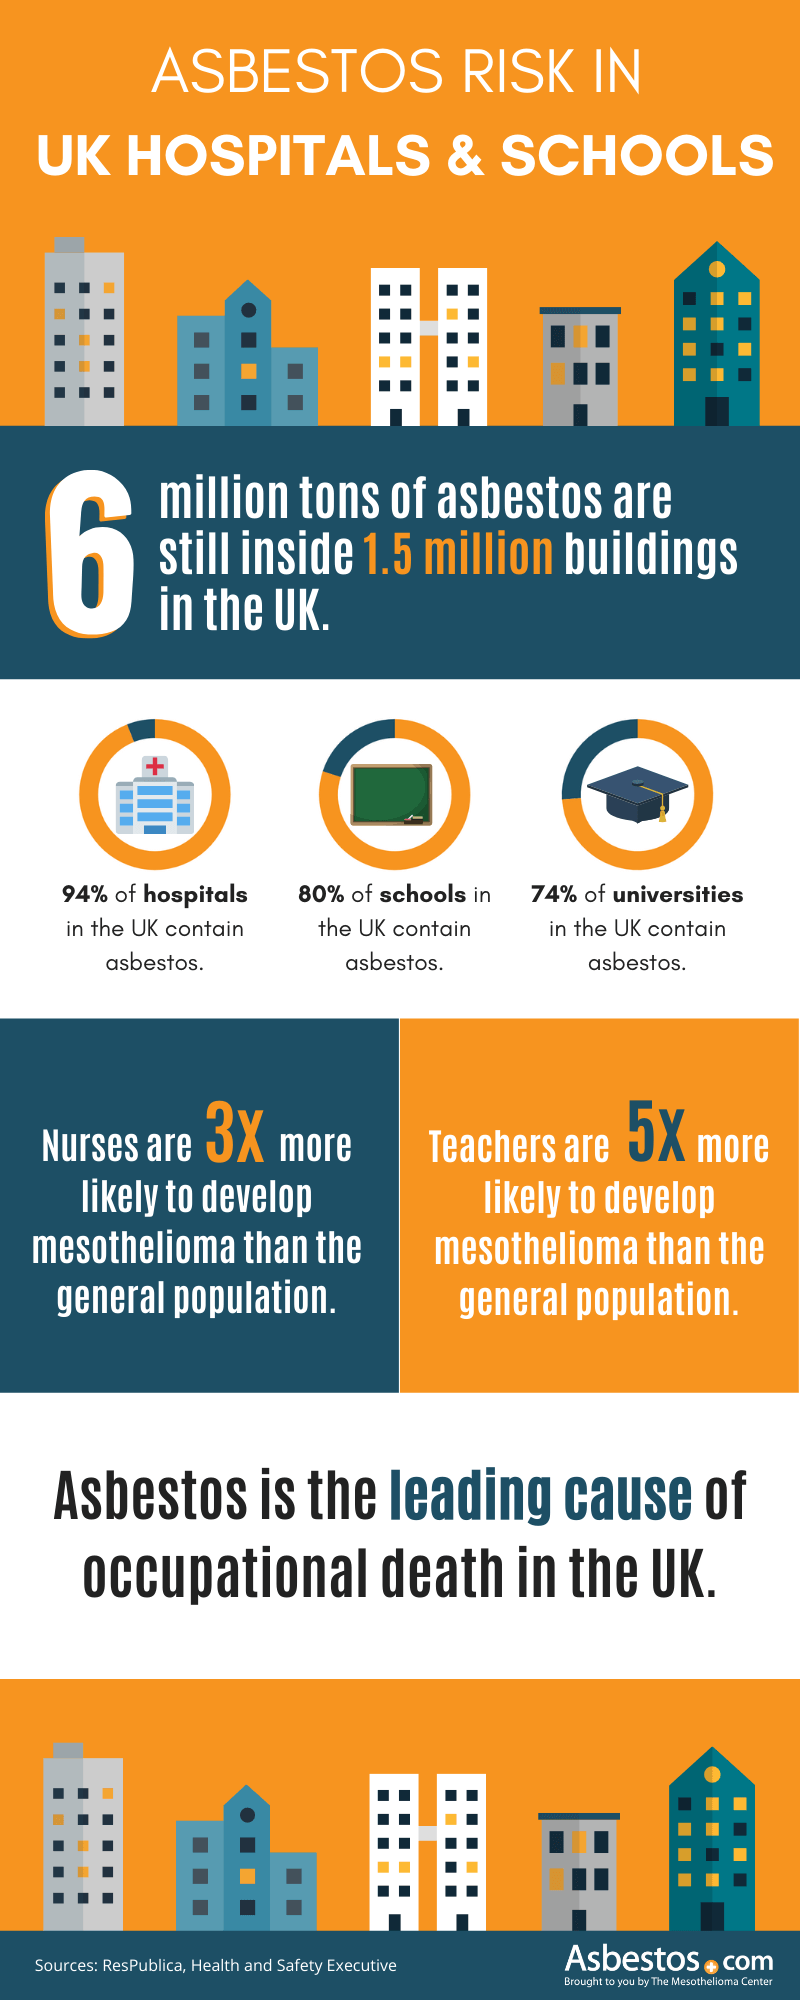 Asbestos risk in UK hospitals and schools infographic